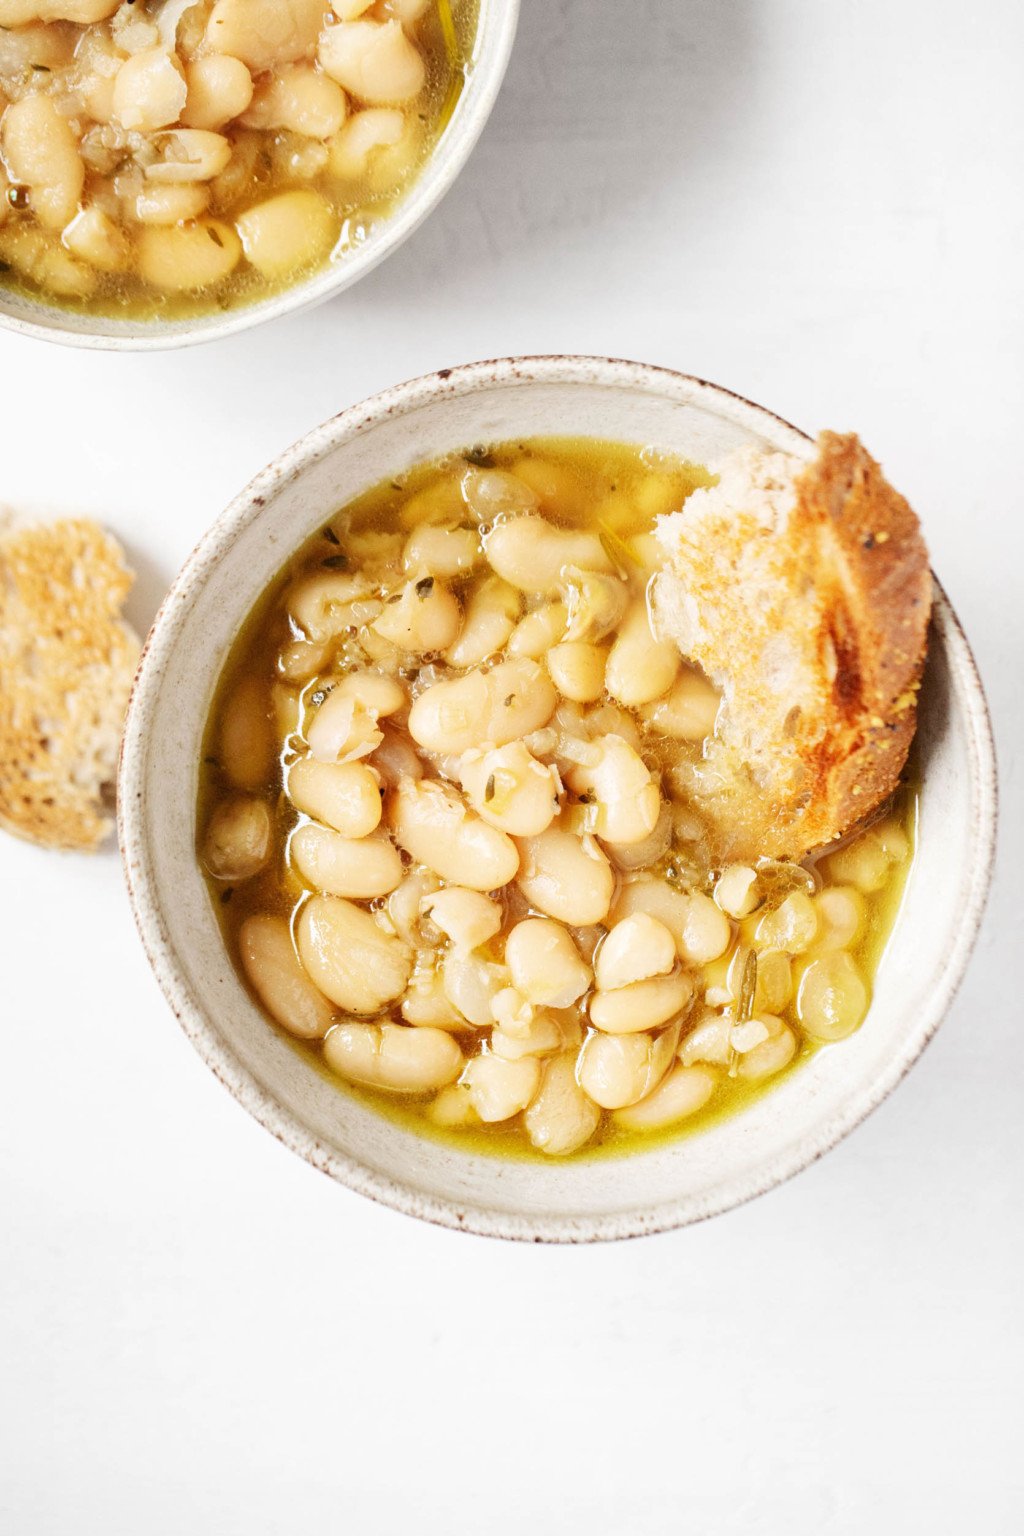 Two white ceramic bowls are filled with brothy white beans, olive oil, and small pieces of bread.